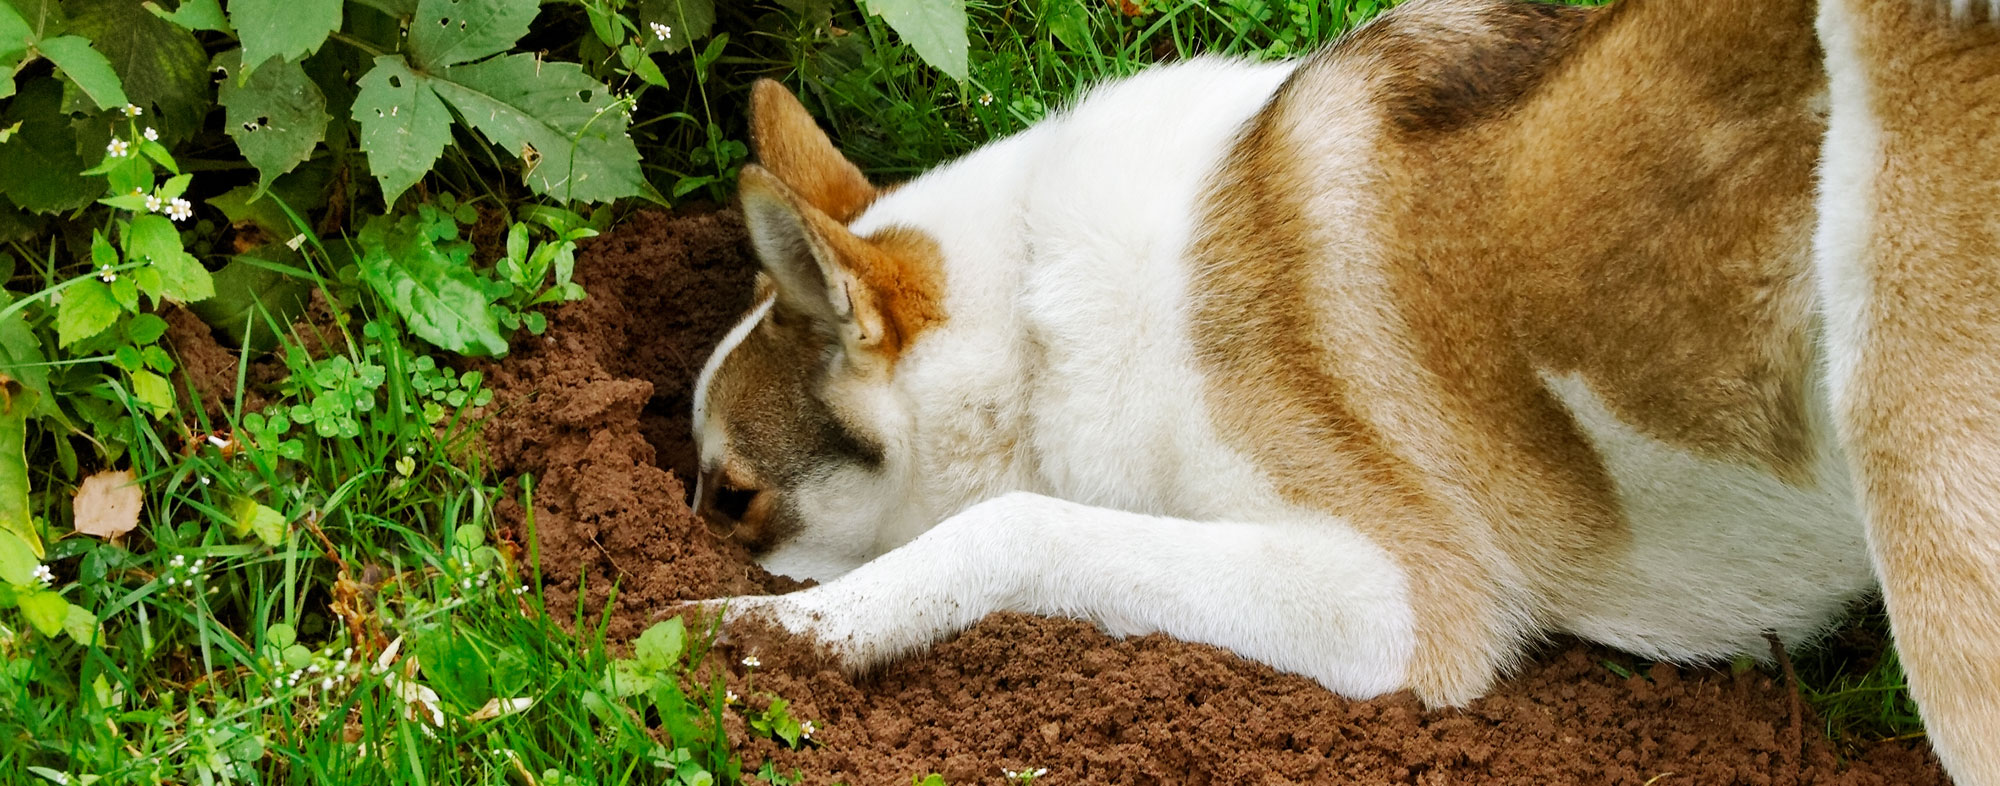 If you dog won't stop digging holes, entice him to dig for his toys